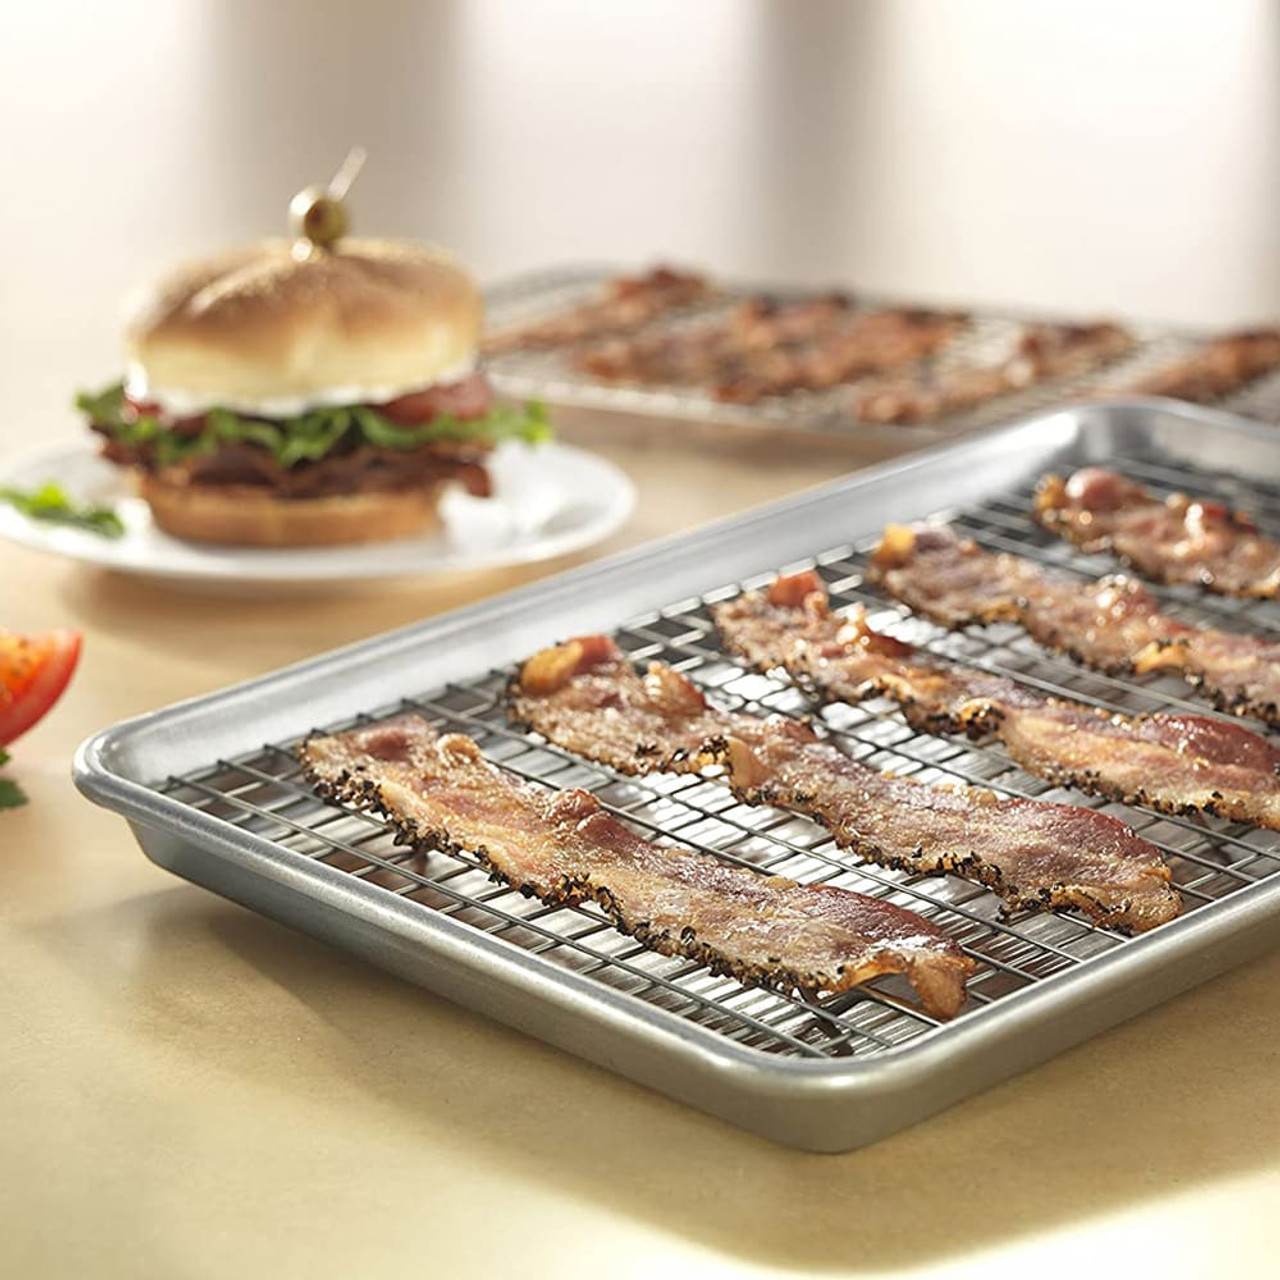 https://cdn11.bigcommerce.com/s-hccytny0od/images/stencil/1280x1280/products/3496/12530/usa-pan-jelly-roll-cooling-rack-pan-set-3__87086.1599174440.jpg?c=2?imbypass=on